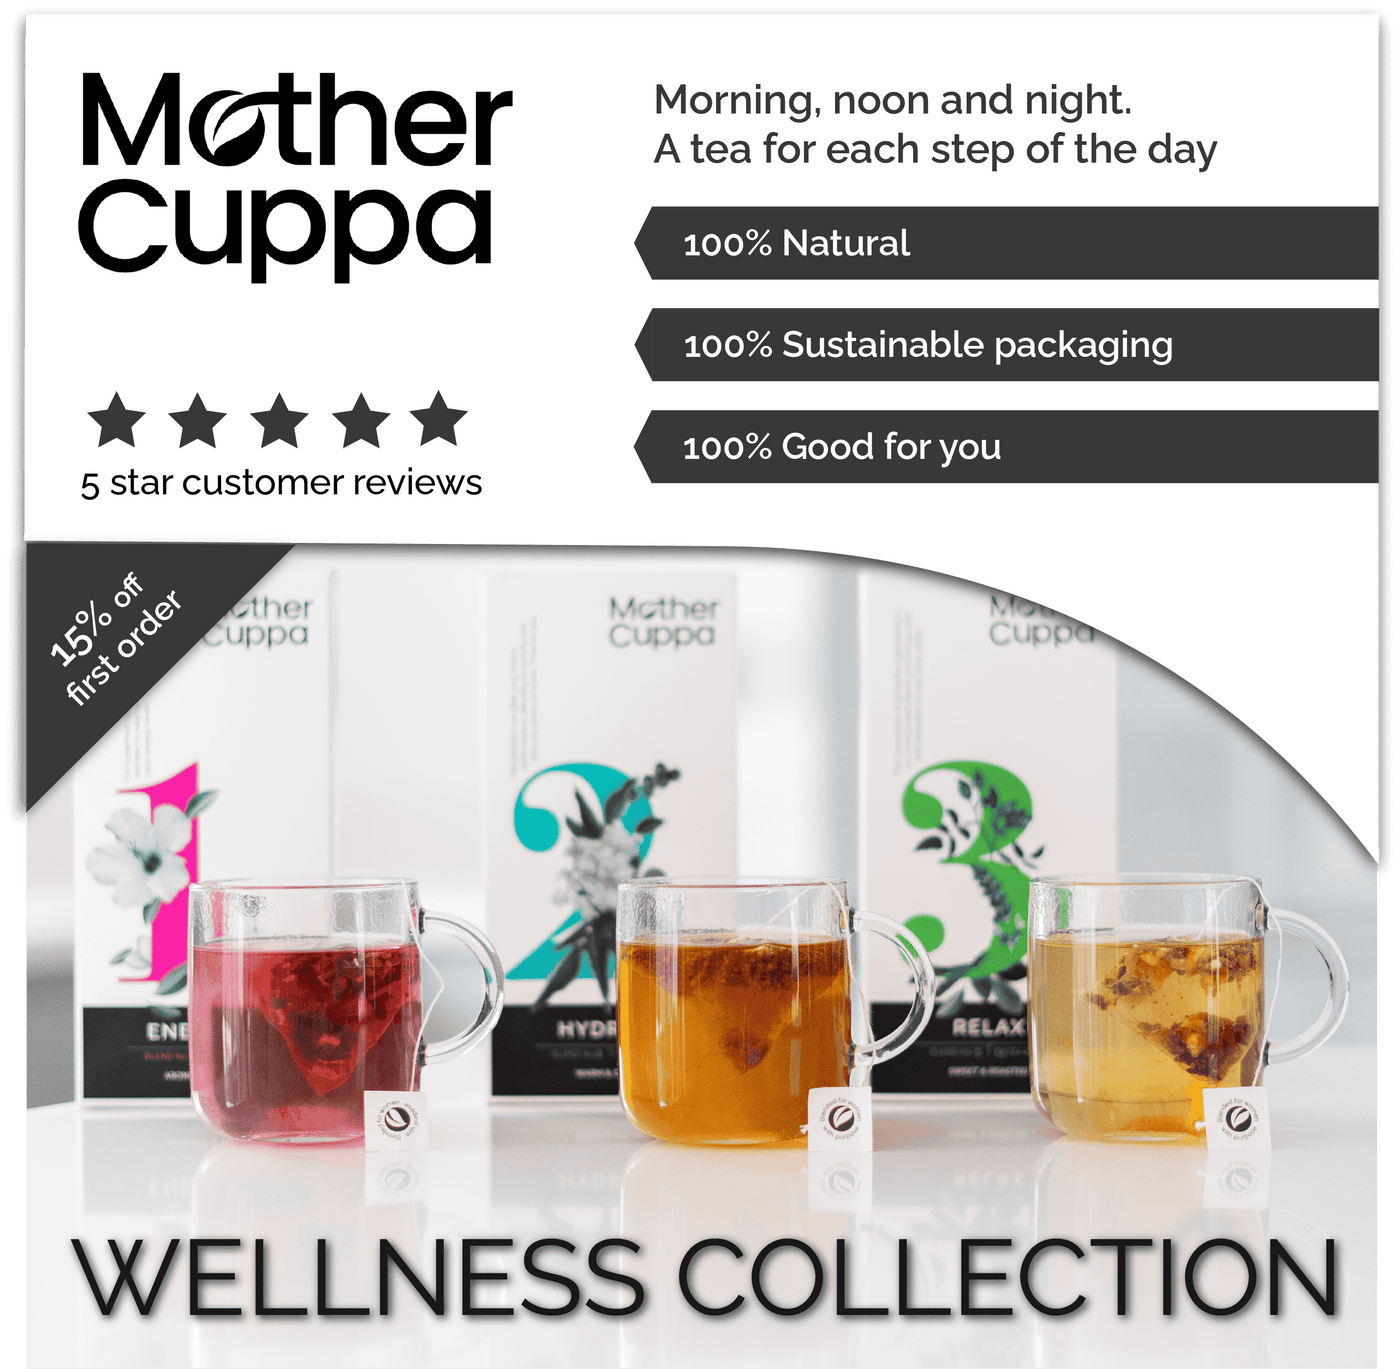 Wellness Collection - 3 Month Gift Subscription